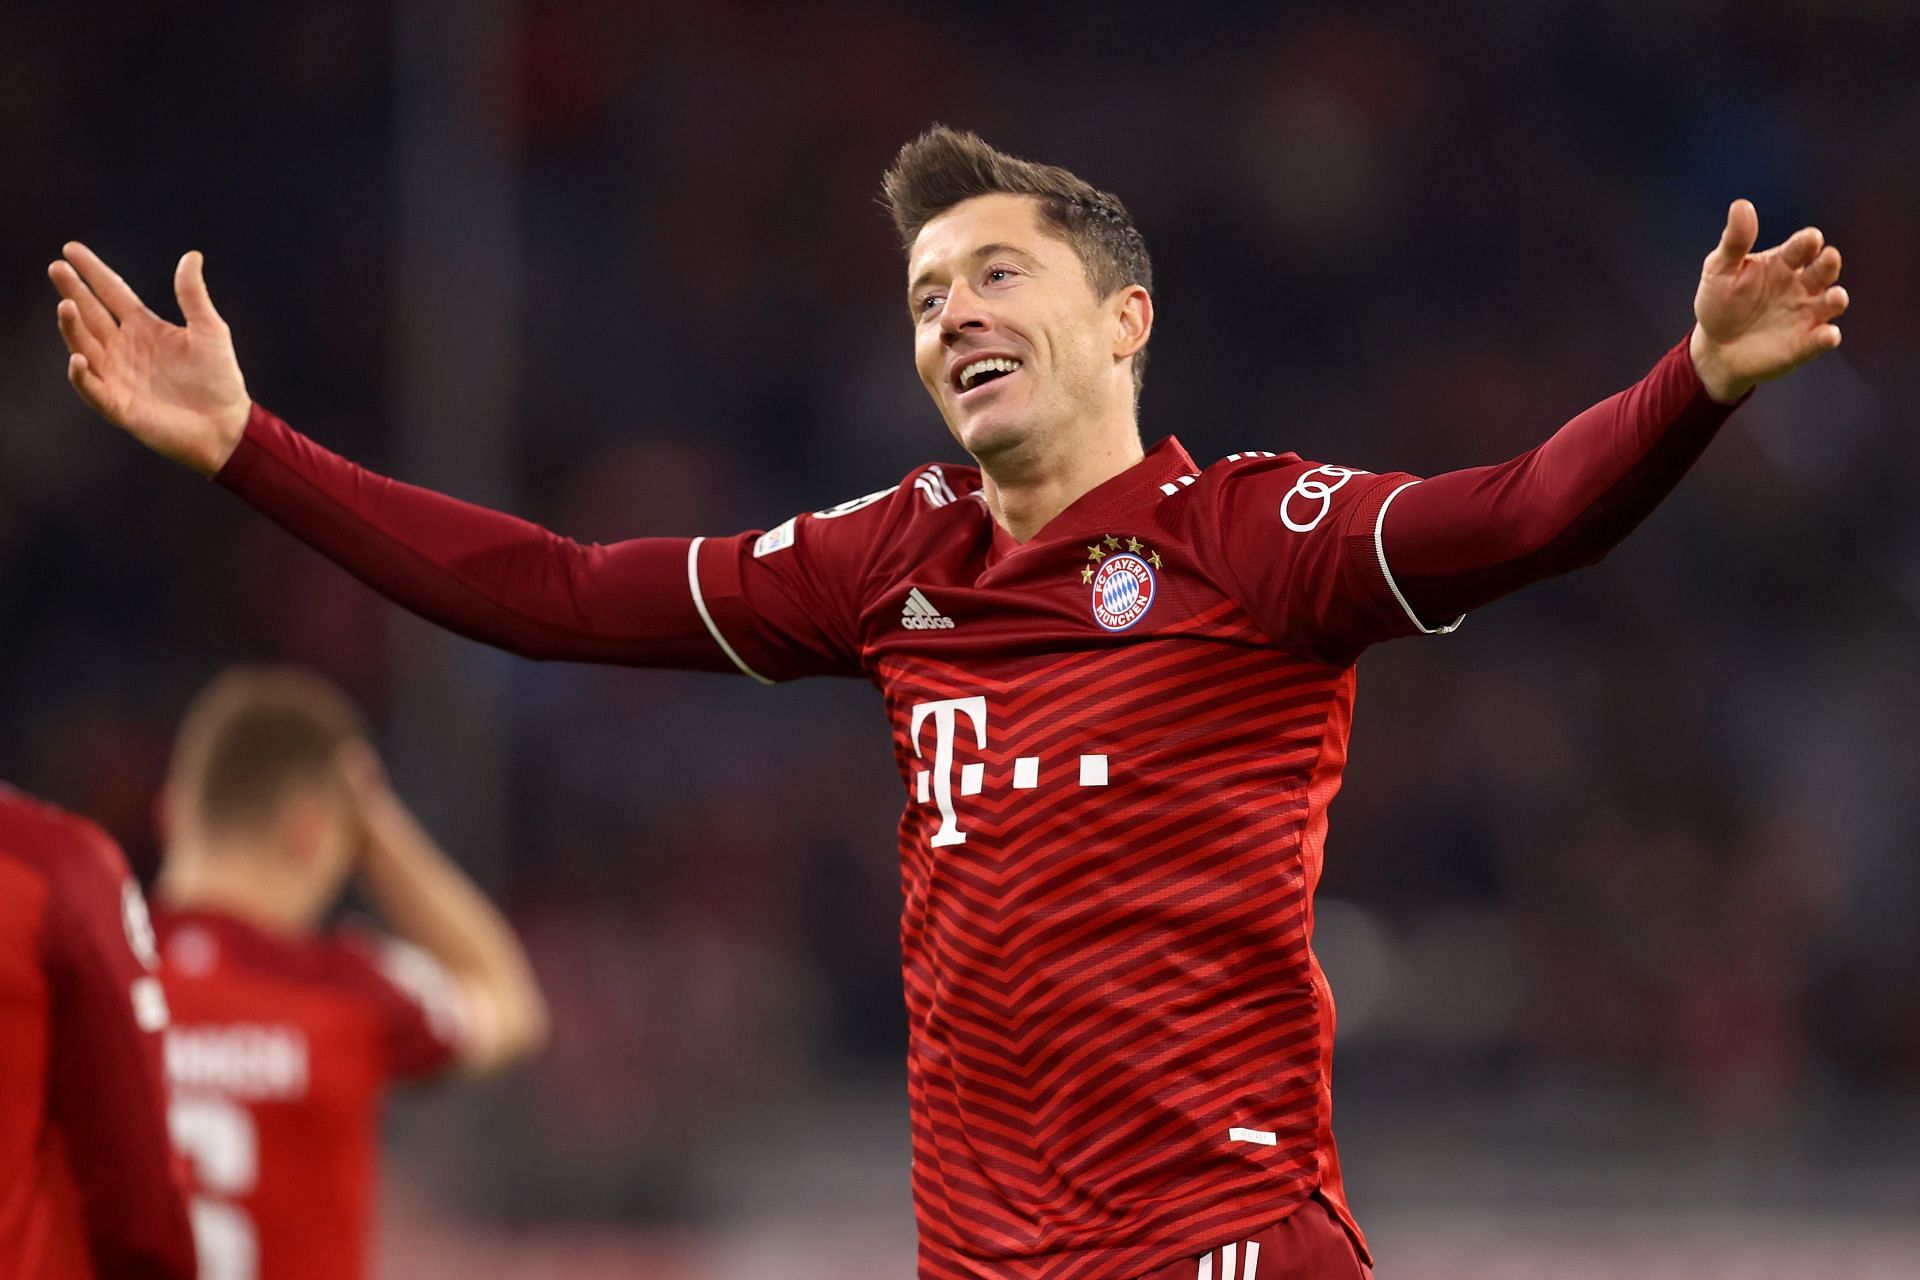 Several football clubs are looking to sign up Lewandowski